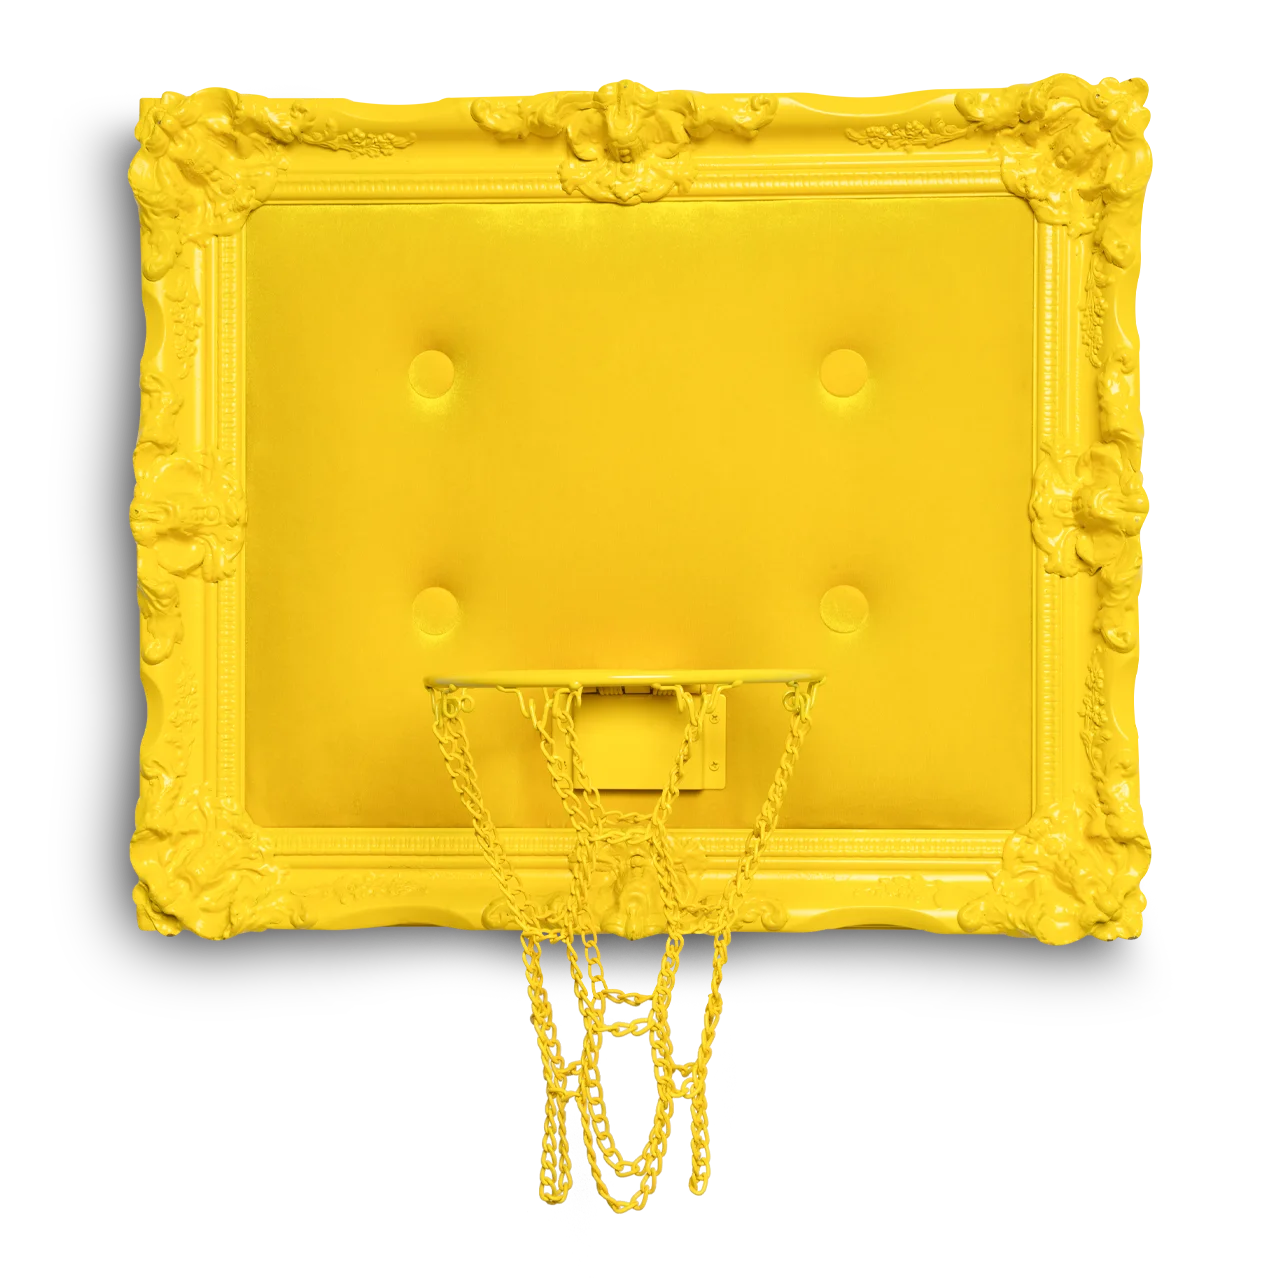 A hoop made of yellow velvet material with a chain dangling from it.